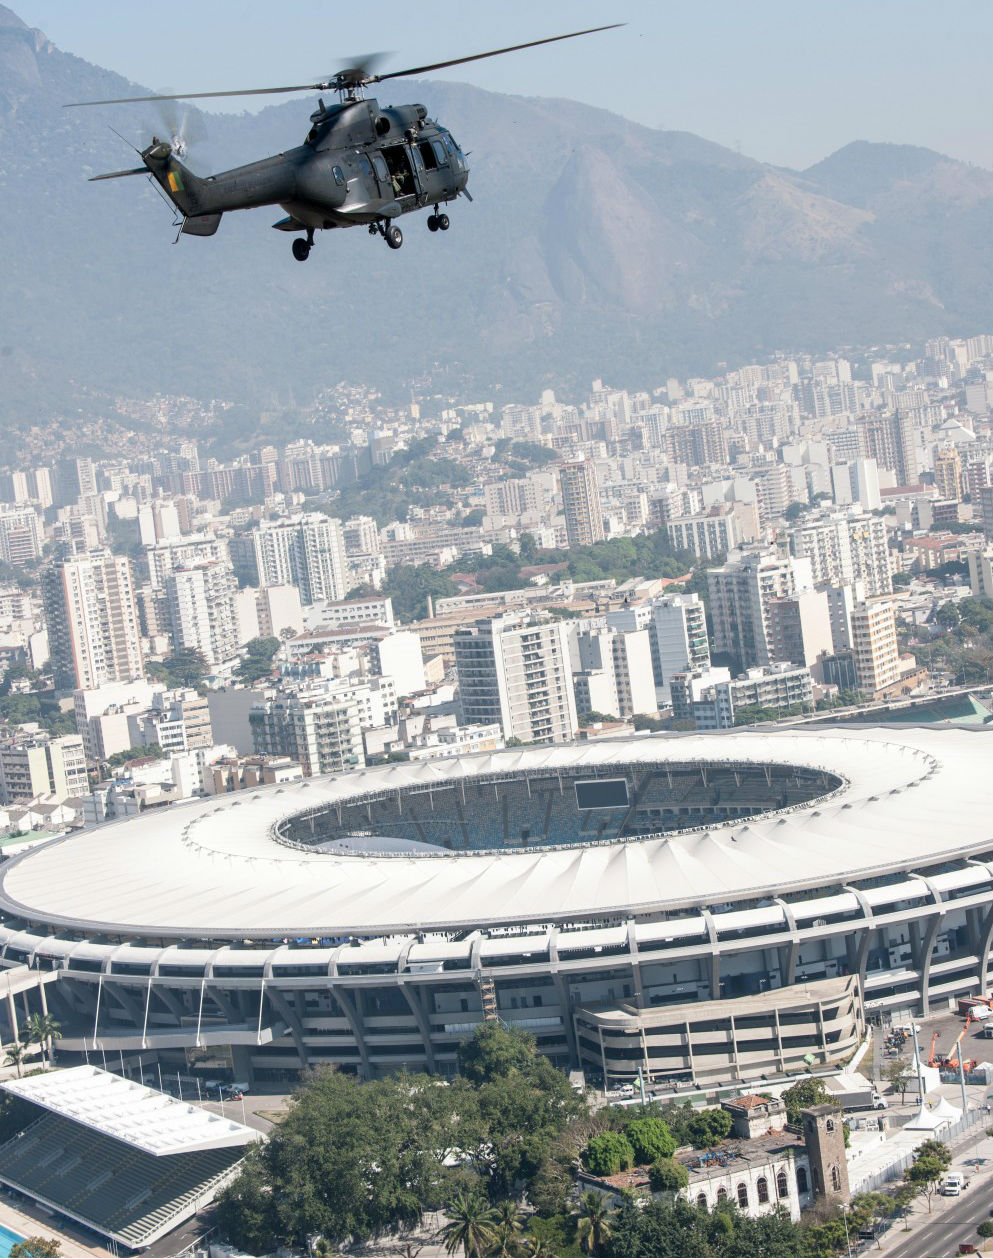 Helicopter flying with stadium in background.